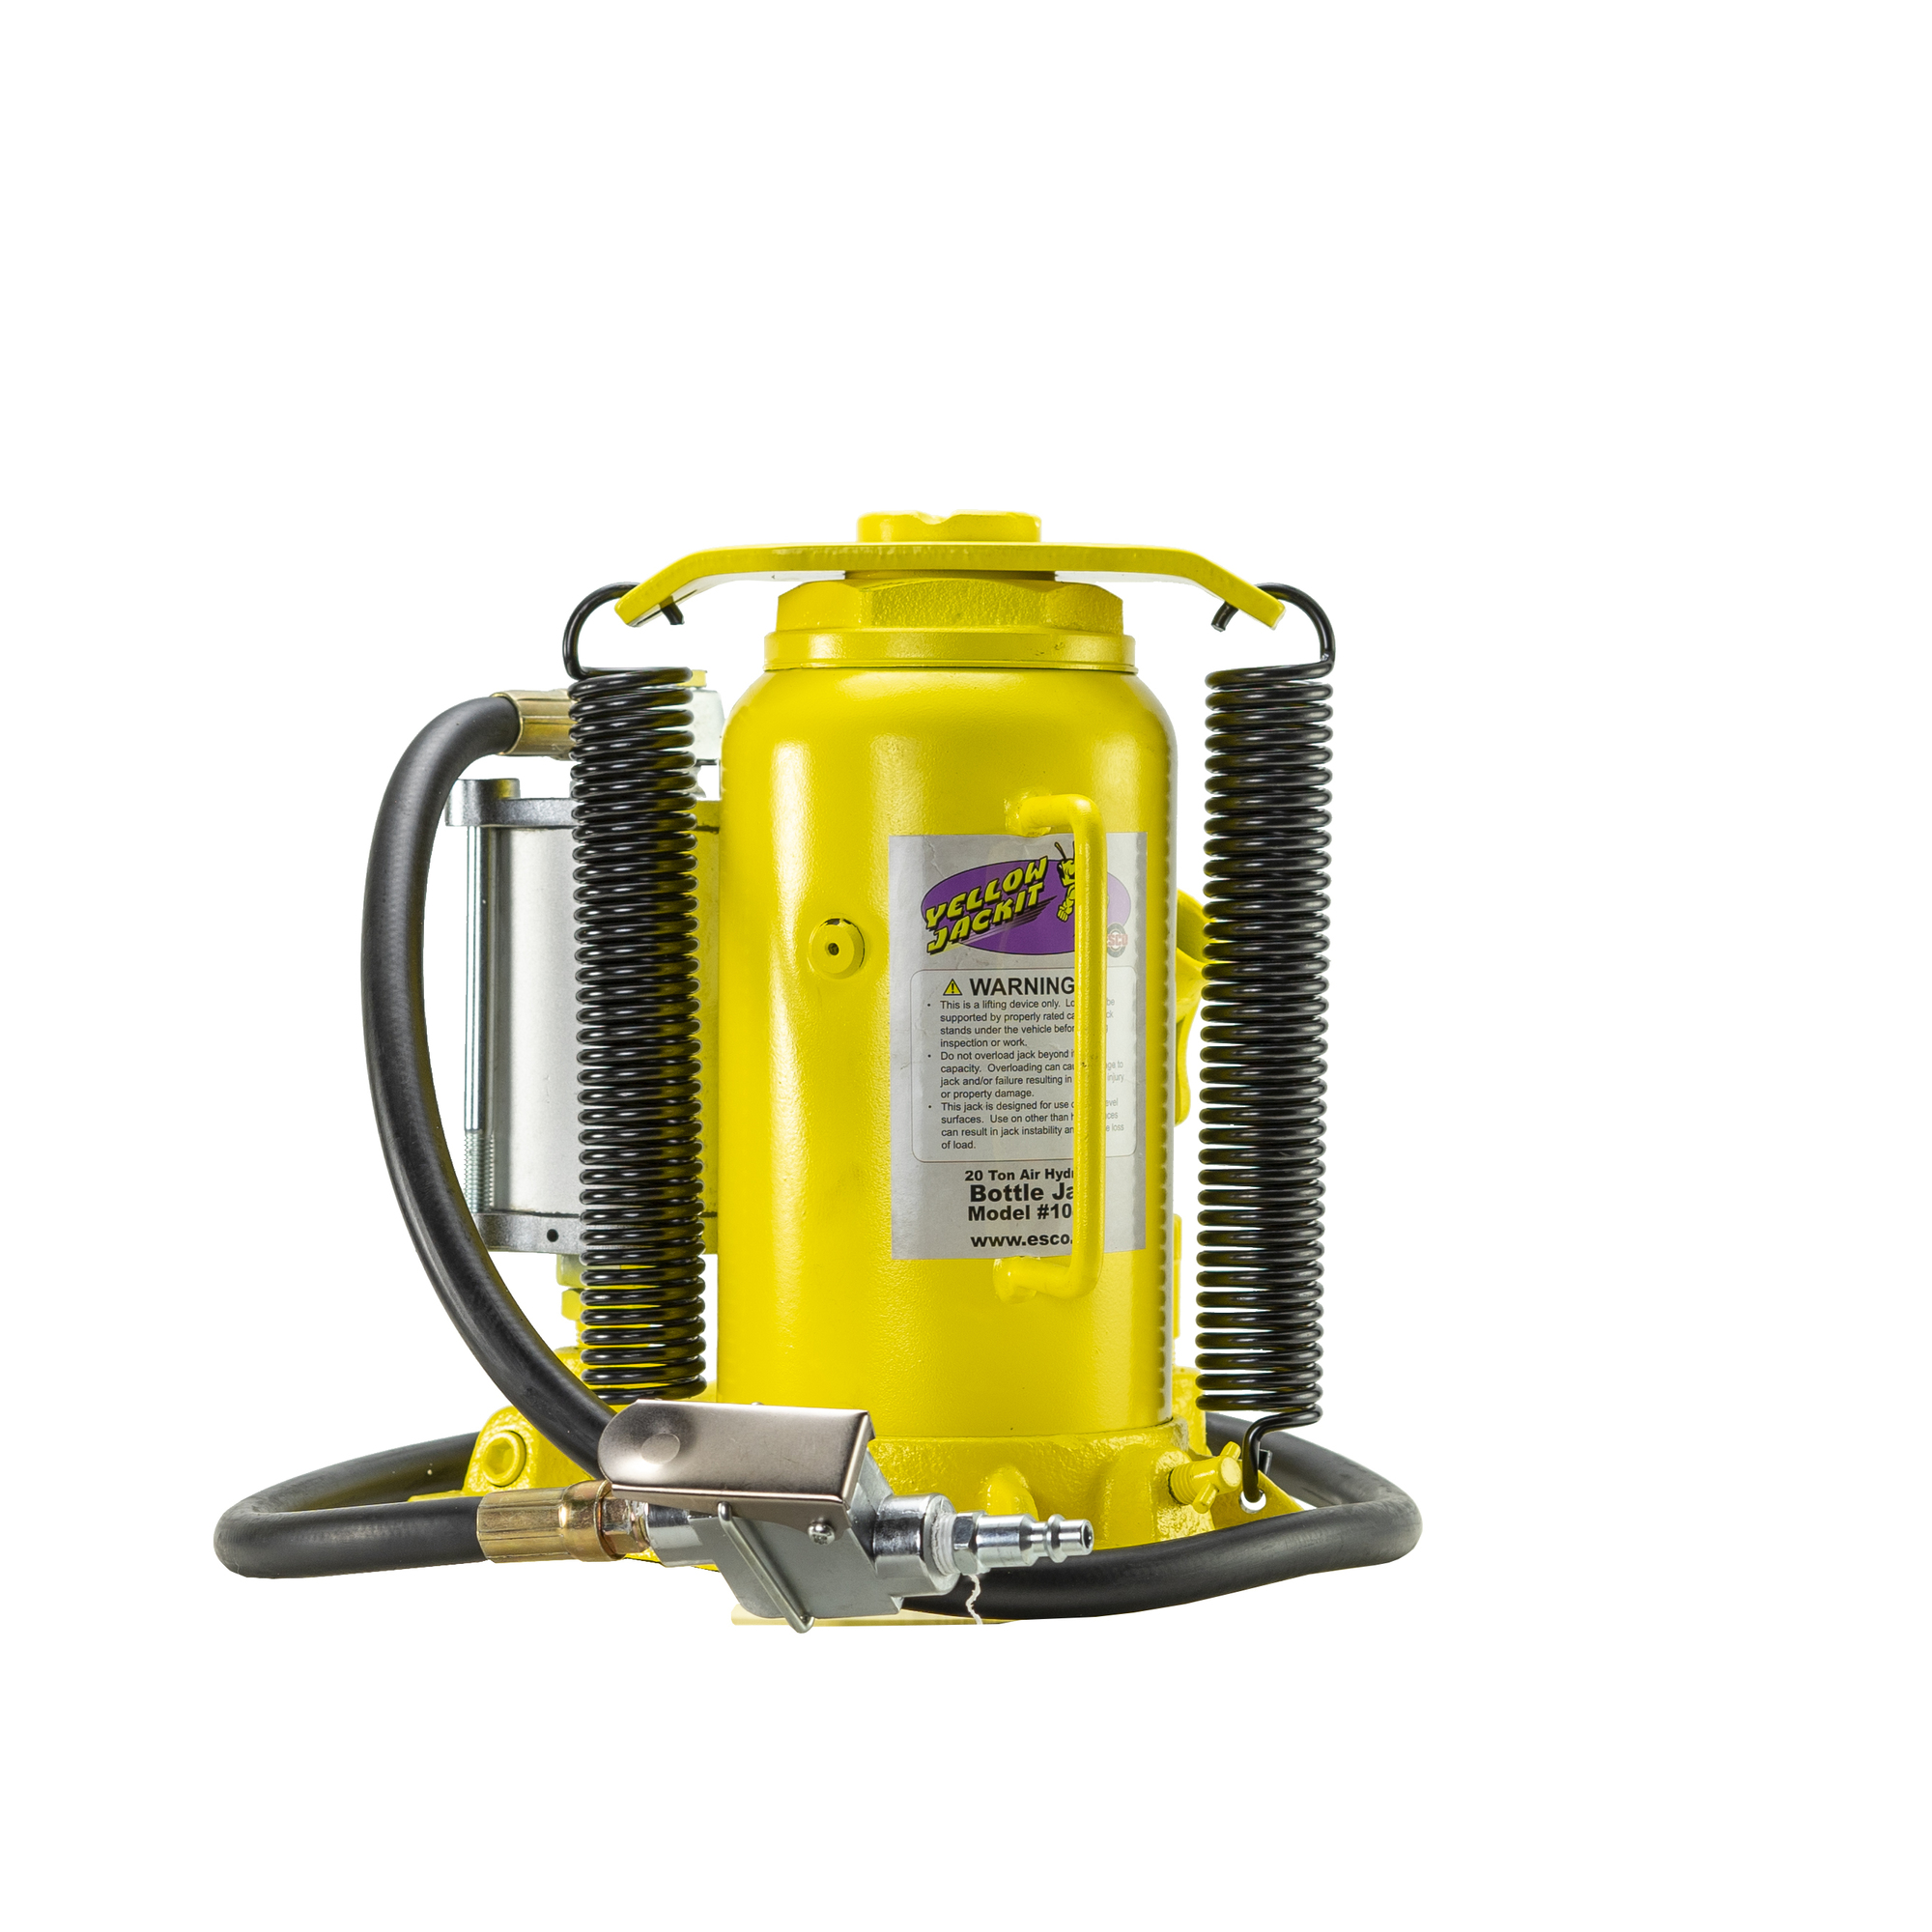 ESCO Yellow Jackit, 20 Ton Series Air/Hydr Bottle jack, Lift Capacity 20  Tons, Max. Lift Height 19.2 in, Min. Lift Height 10.3 in, Model# 10450  Northern Tool